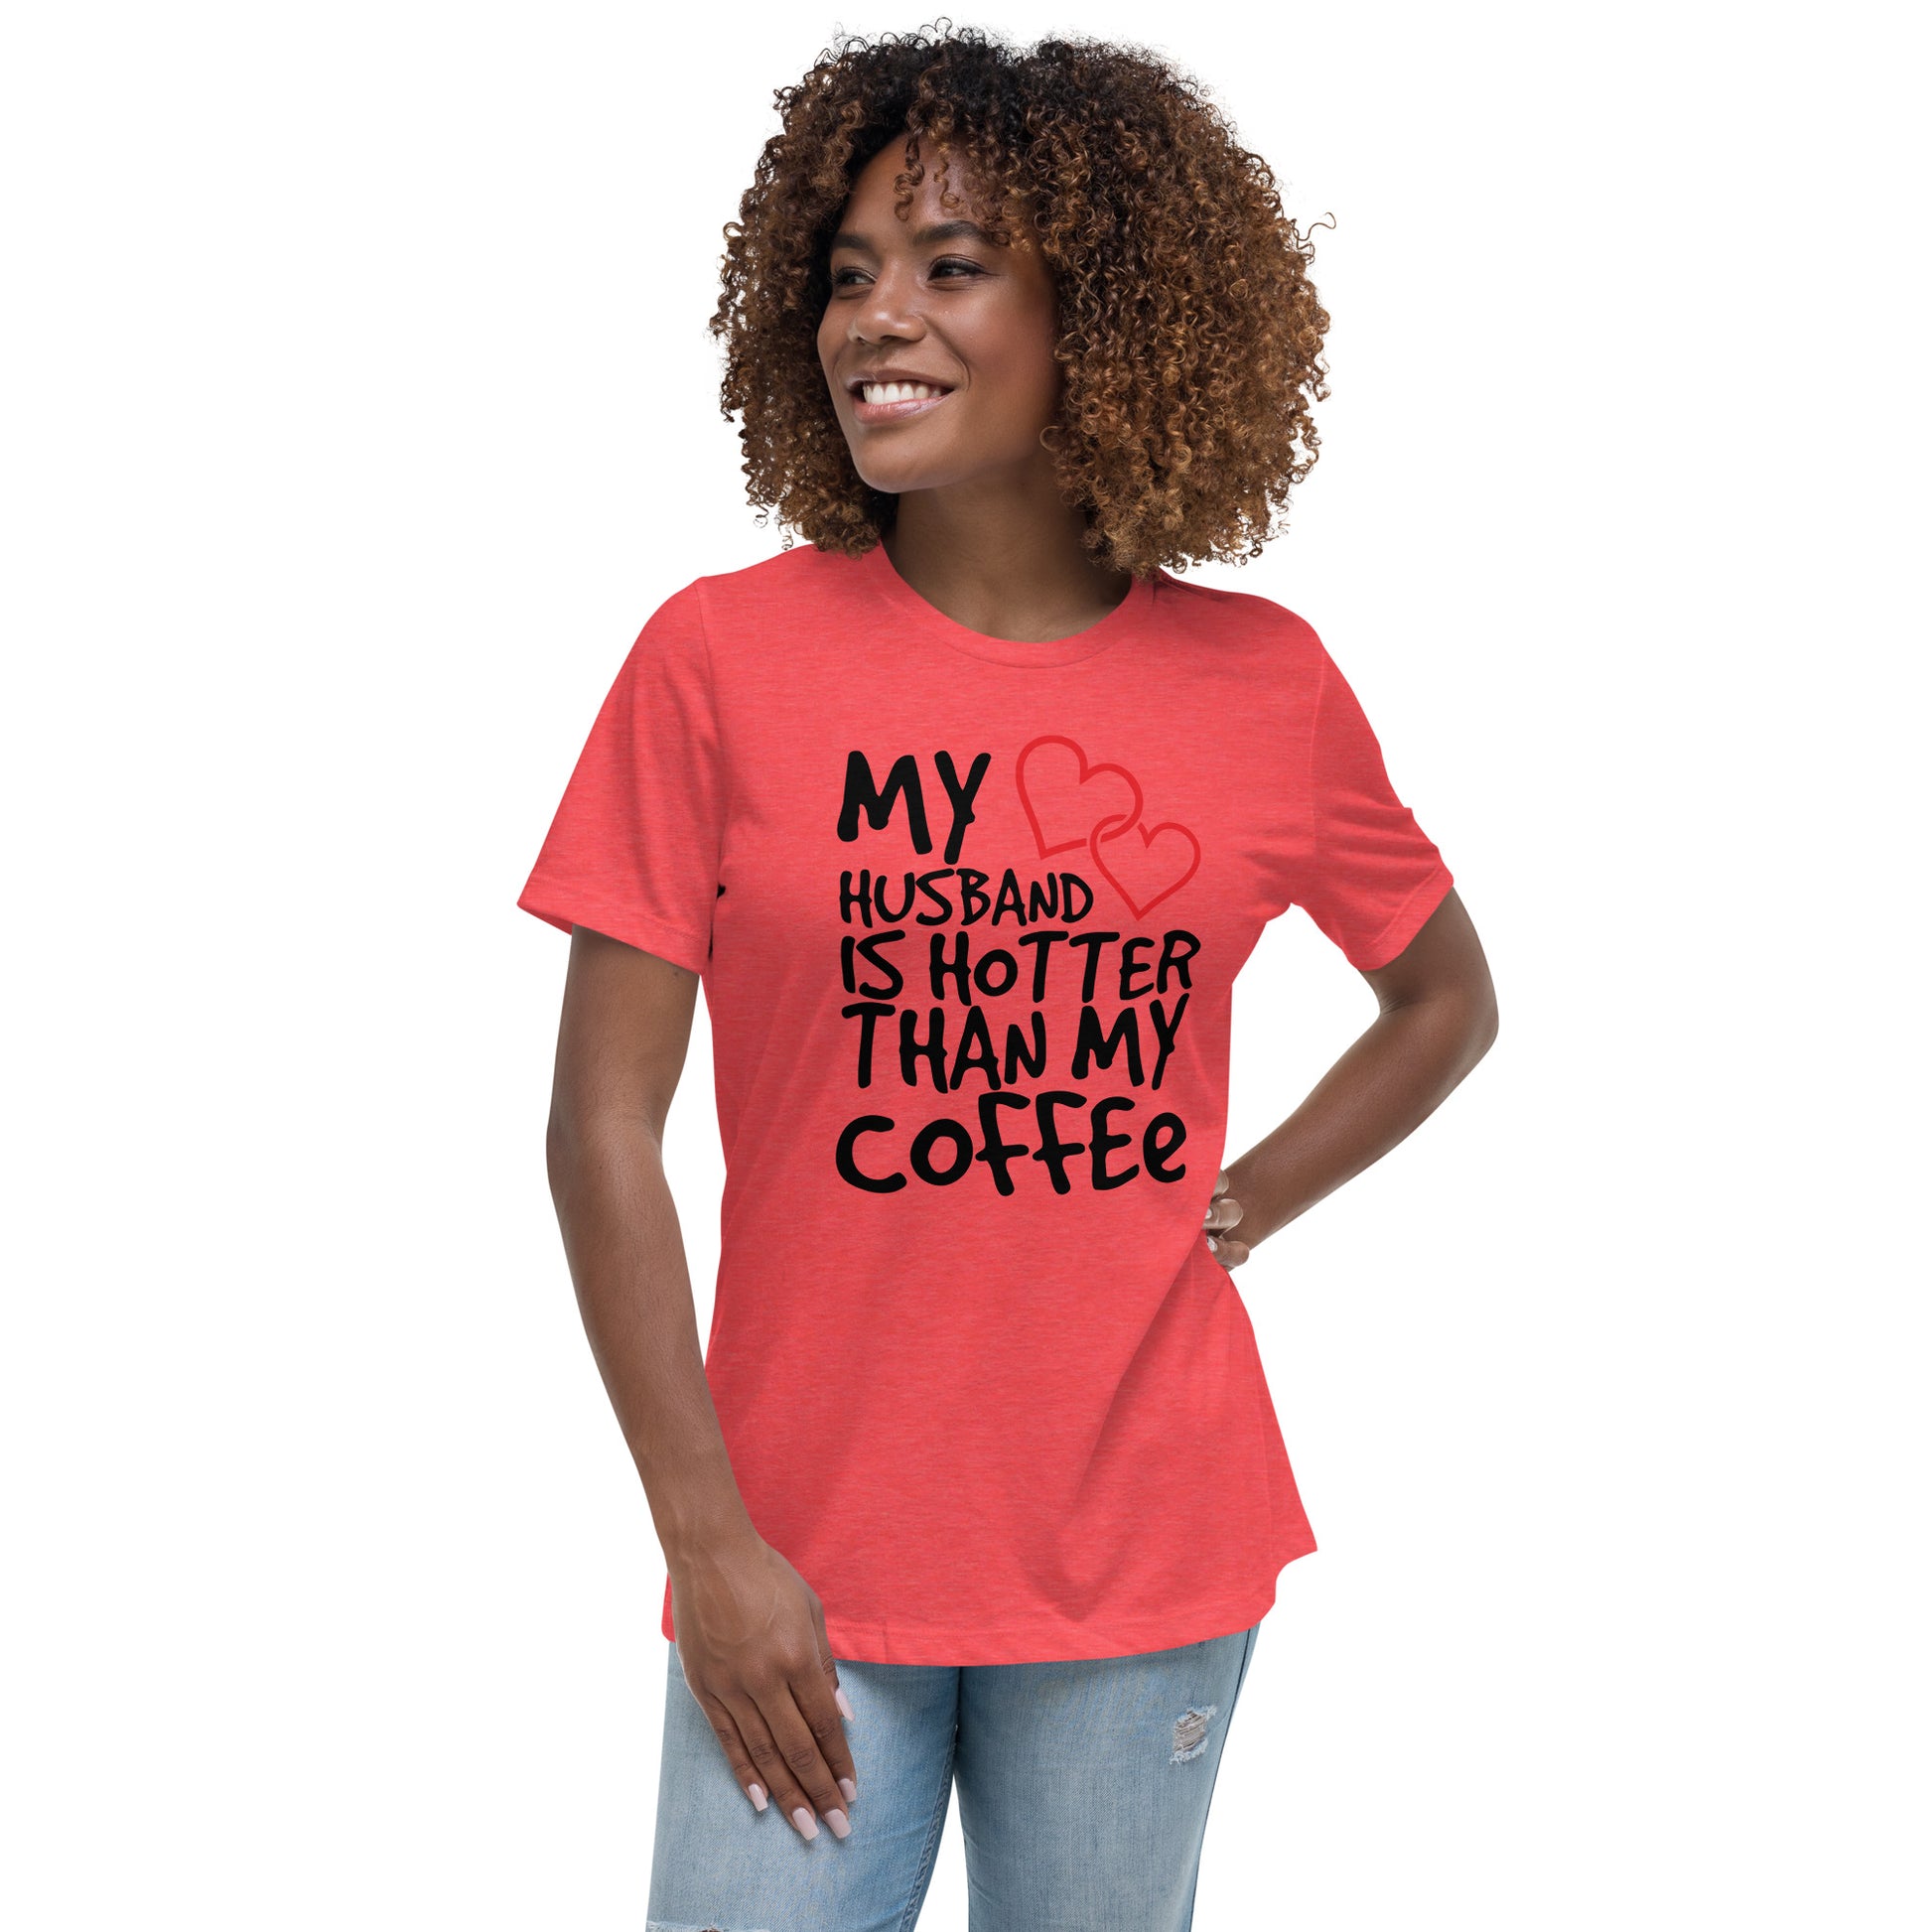 My Husband is Hotter Than My Coffee Women's Relaxed T-Shirt Tee Tshirt